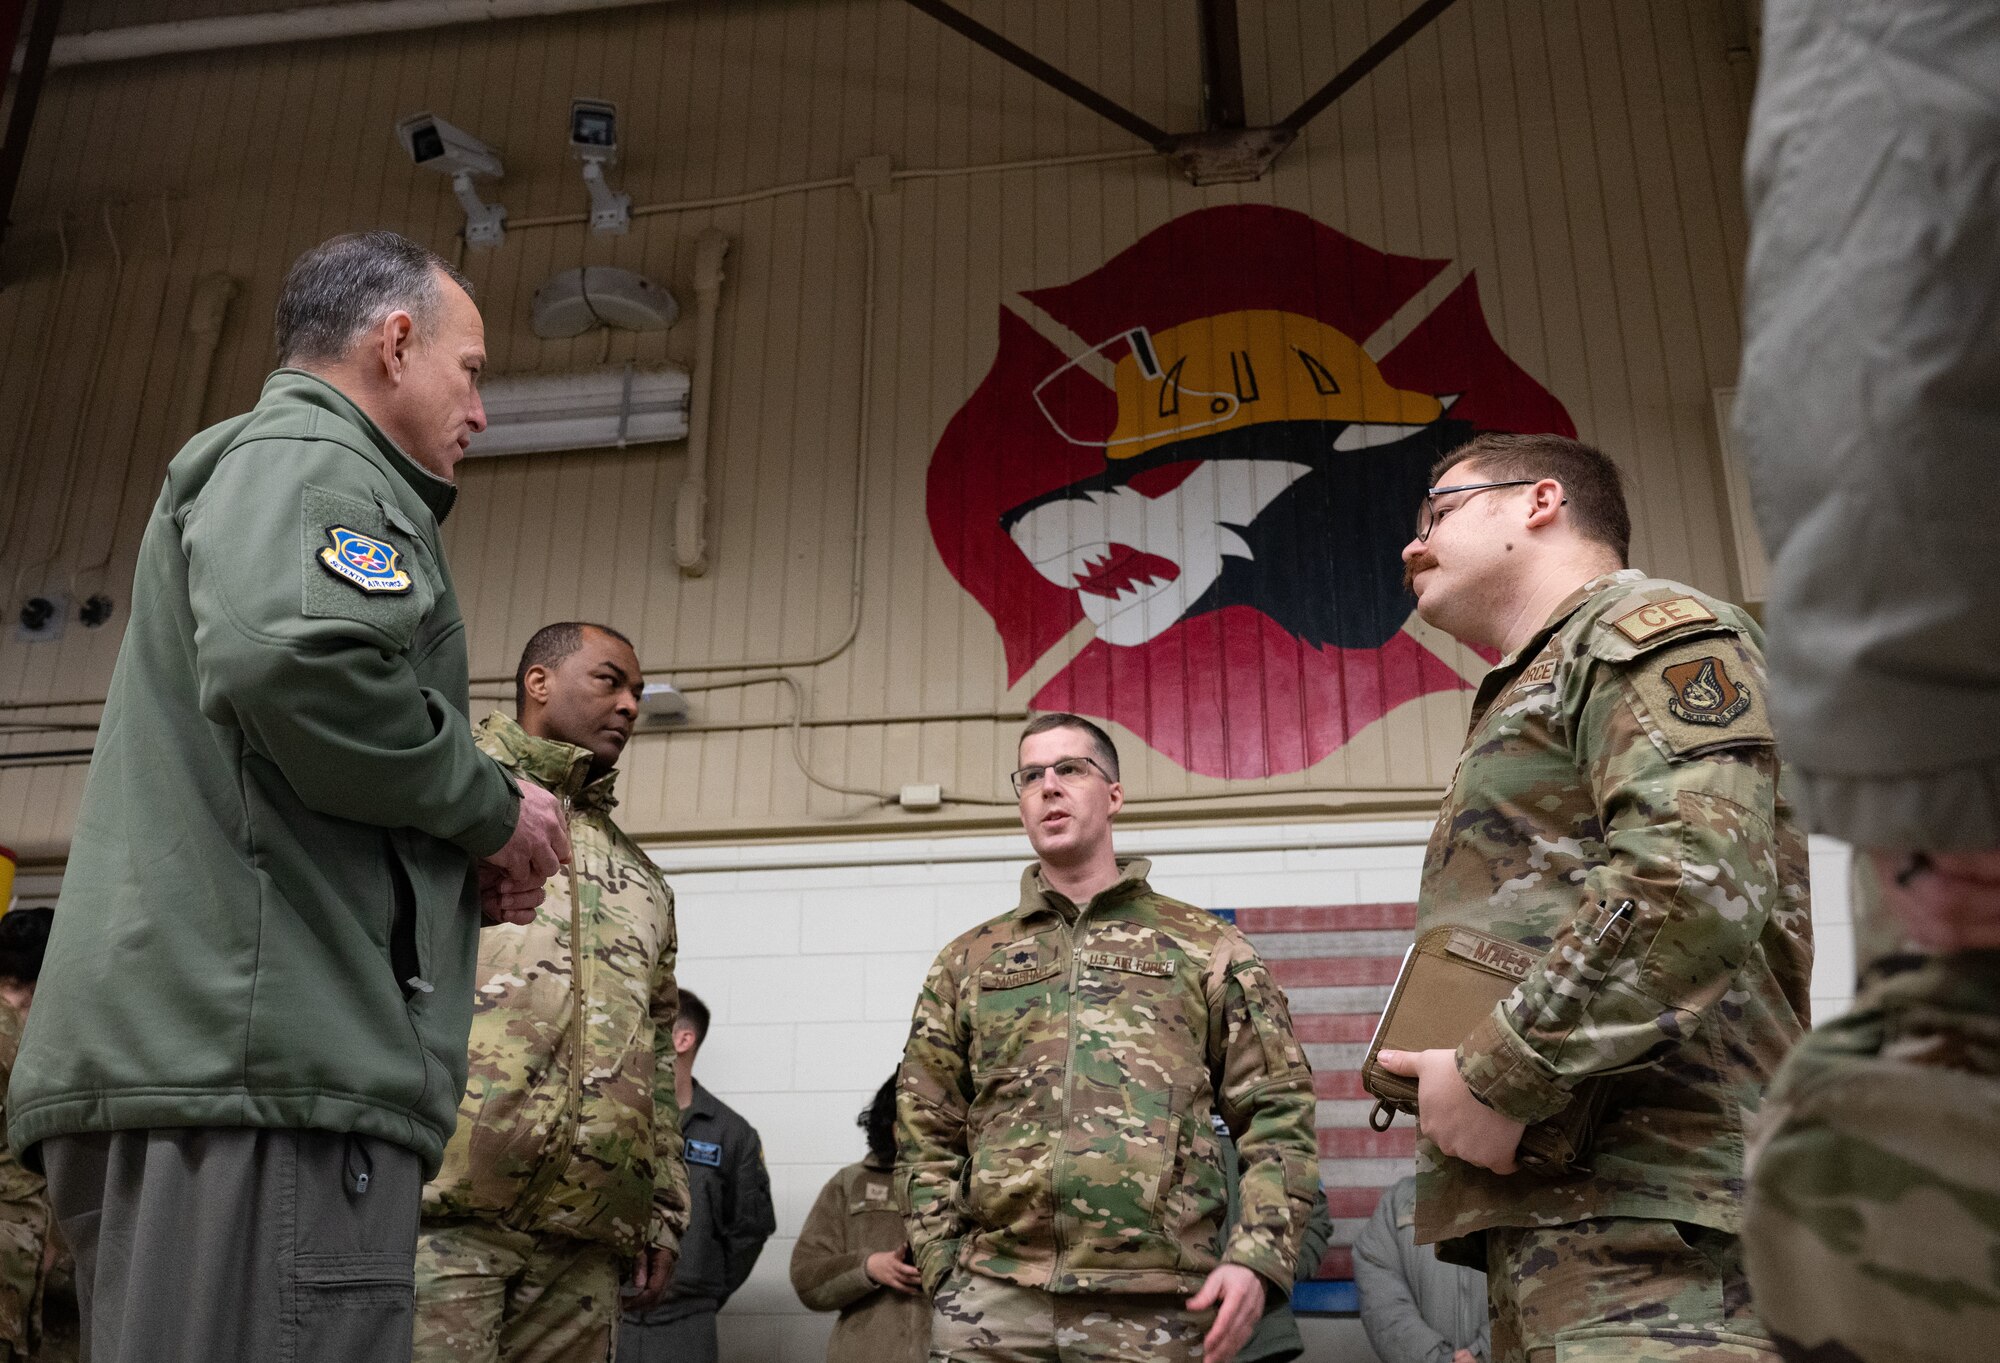 U.S. Air Force Lt. Gen. Scott L. Pleus (left), 7th Air Force commander and Chief Master Sgt. Alvin R. Dyer (center left), 7th AF command chief, talk with 8th Mission Support Group and 8th Civil Engineer Squadron leaders, at Kunsan Air Base, Republic of Korea, Jan. 25, 2023. Gen. Pleus conducted battlefield circulation tours to better understand the Wolf Pack’s needs so Airmen can continue supporting a free and open Indo-Pacific region. (U.S. Air Force photo by Staff Sgt. Sadie Colbert)